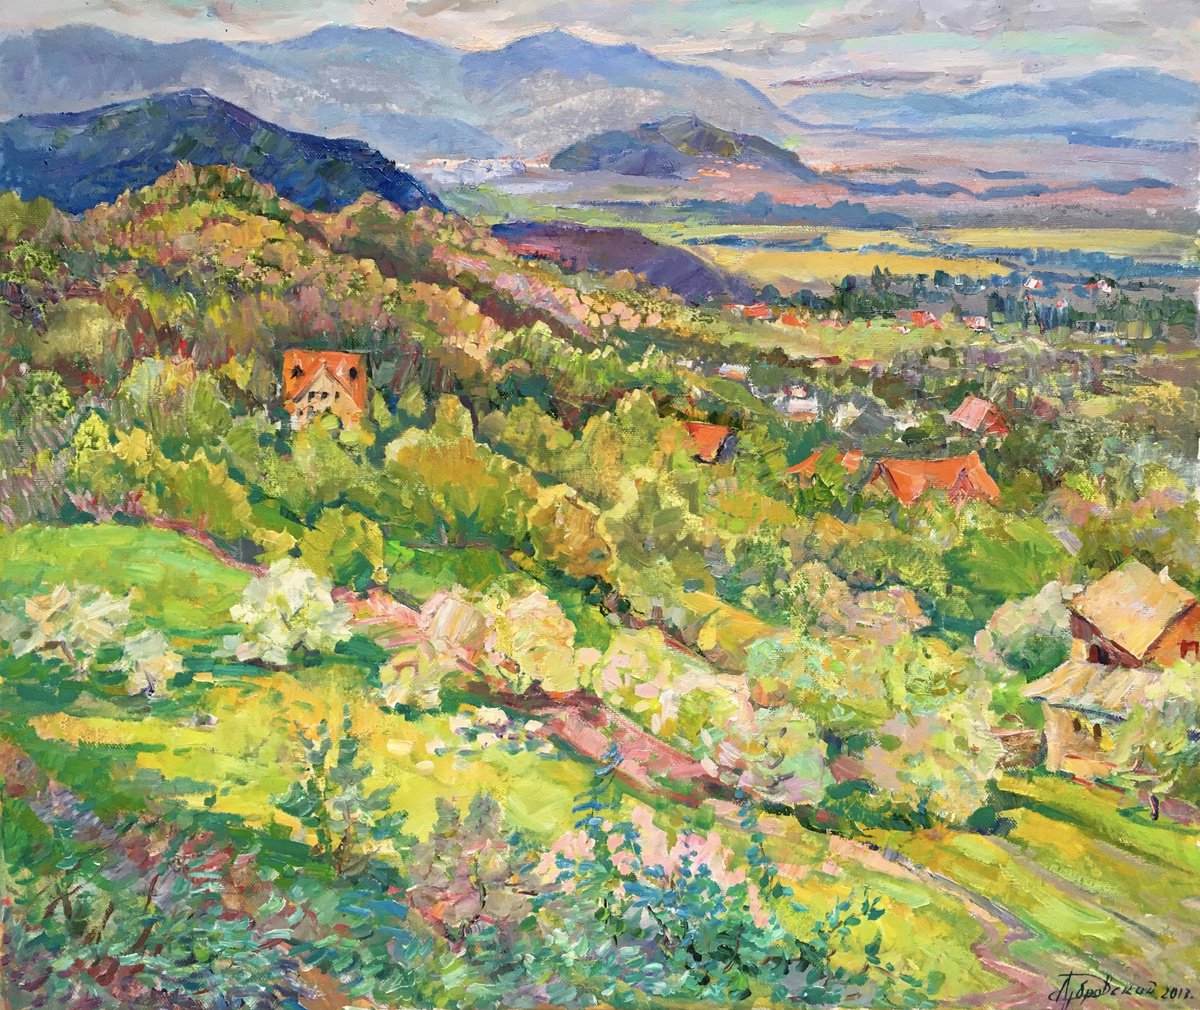 Spring in the Mountains by Aleksandr Dubrovskyy